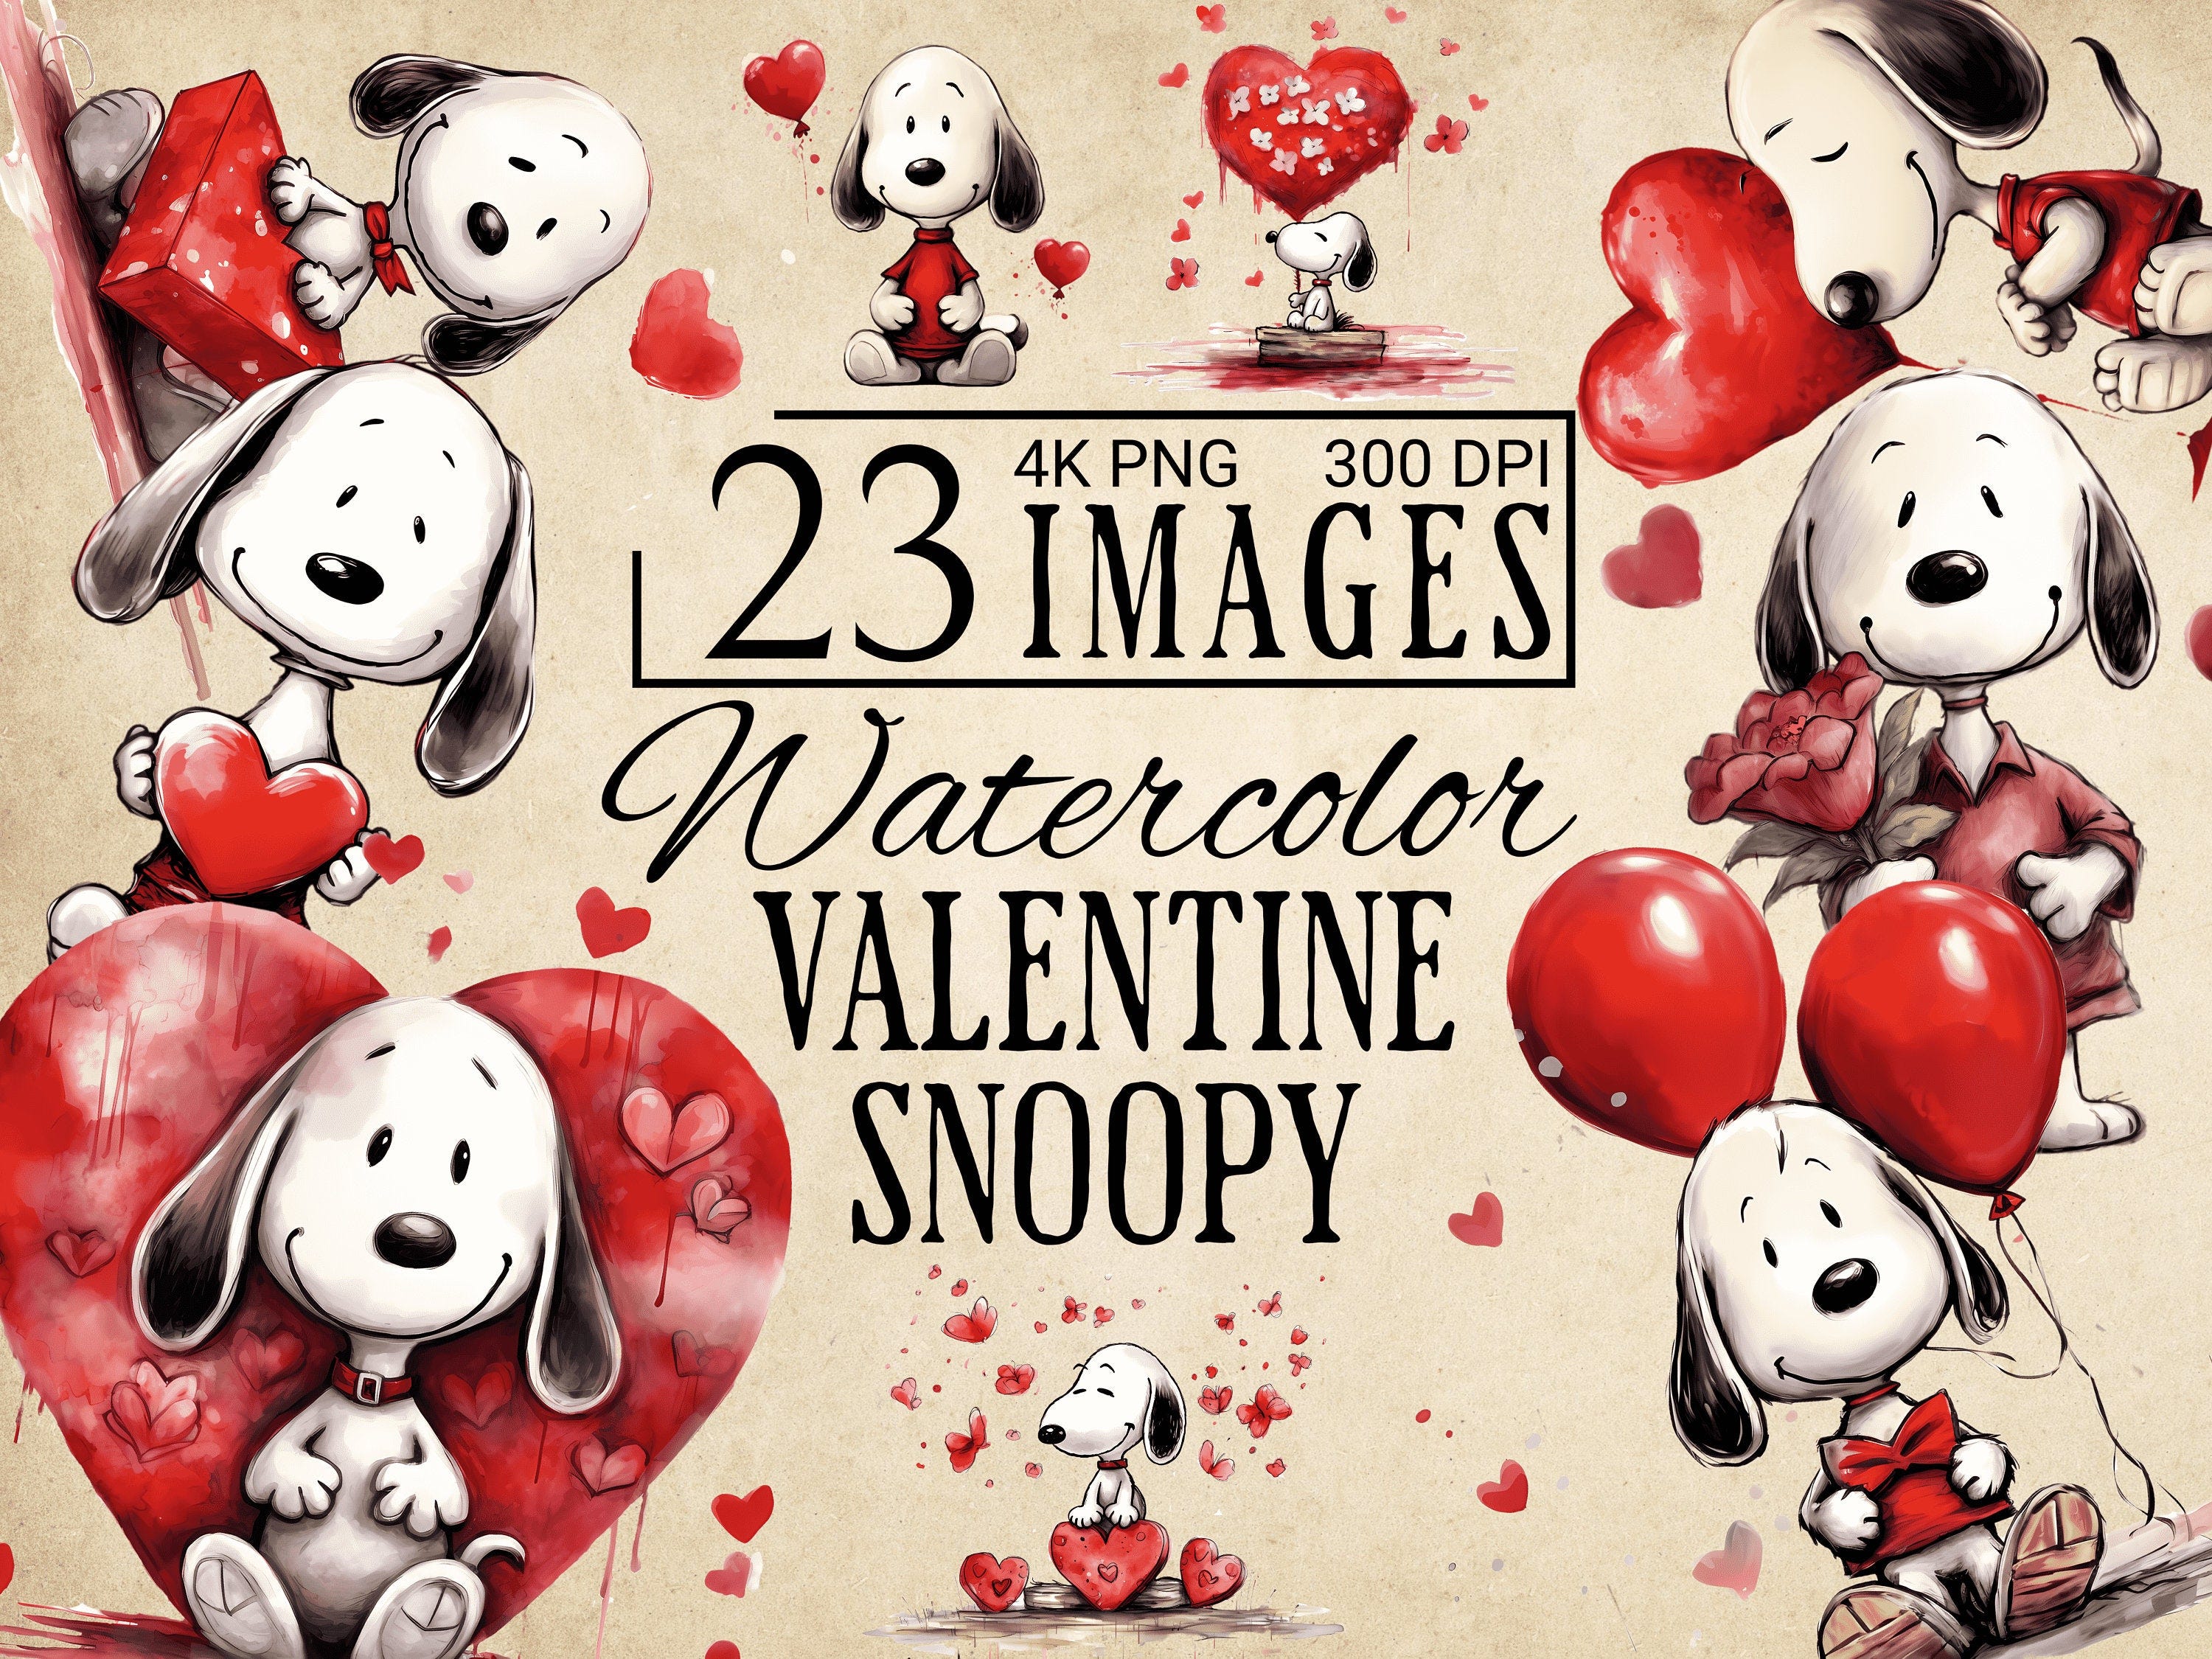 Watercolor Valentine Snoopy, 23 High Quality PNG. Snoopy Clipart, Snoopy Gift, Snoopy Mug Wrap, Snoopy, Snoopy Decoration, Snoopy Art Gift.